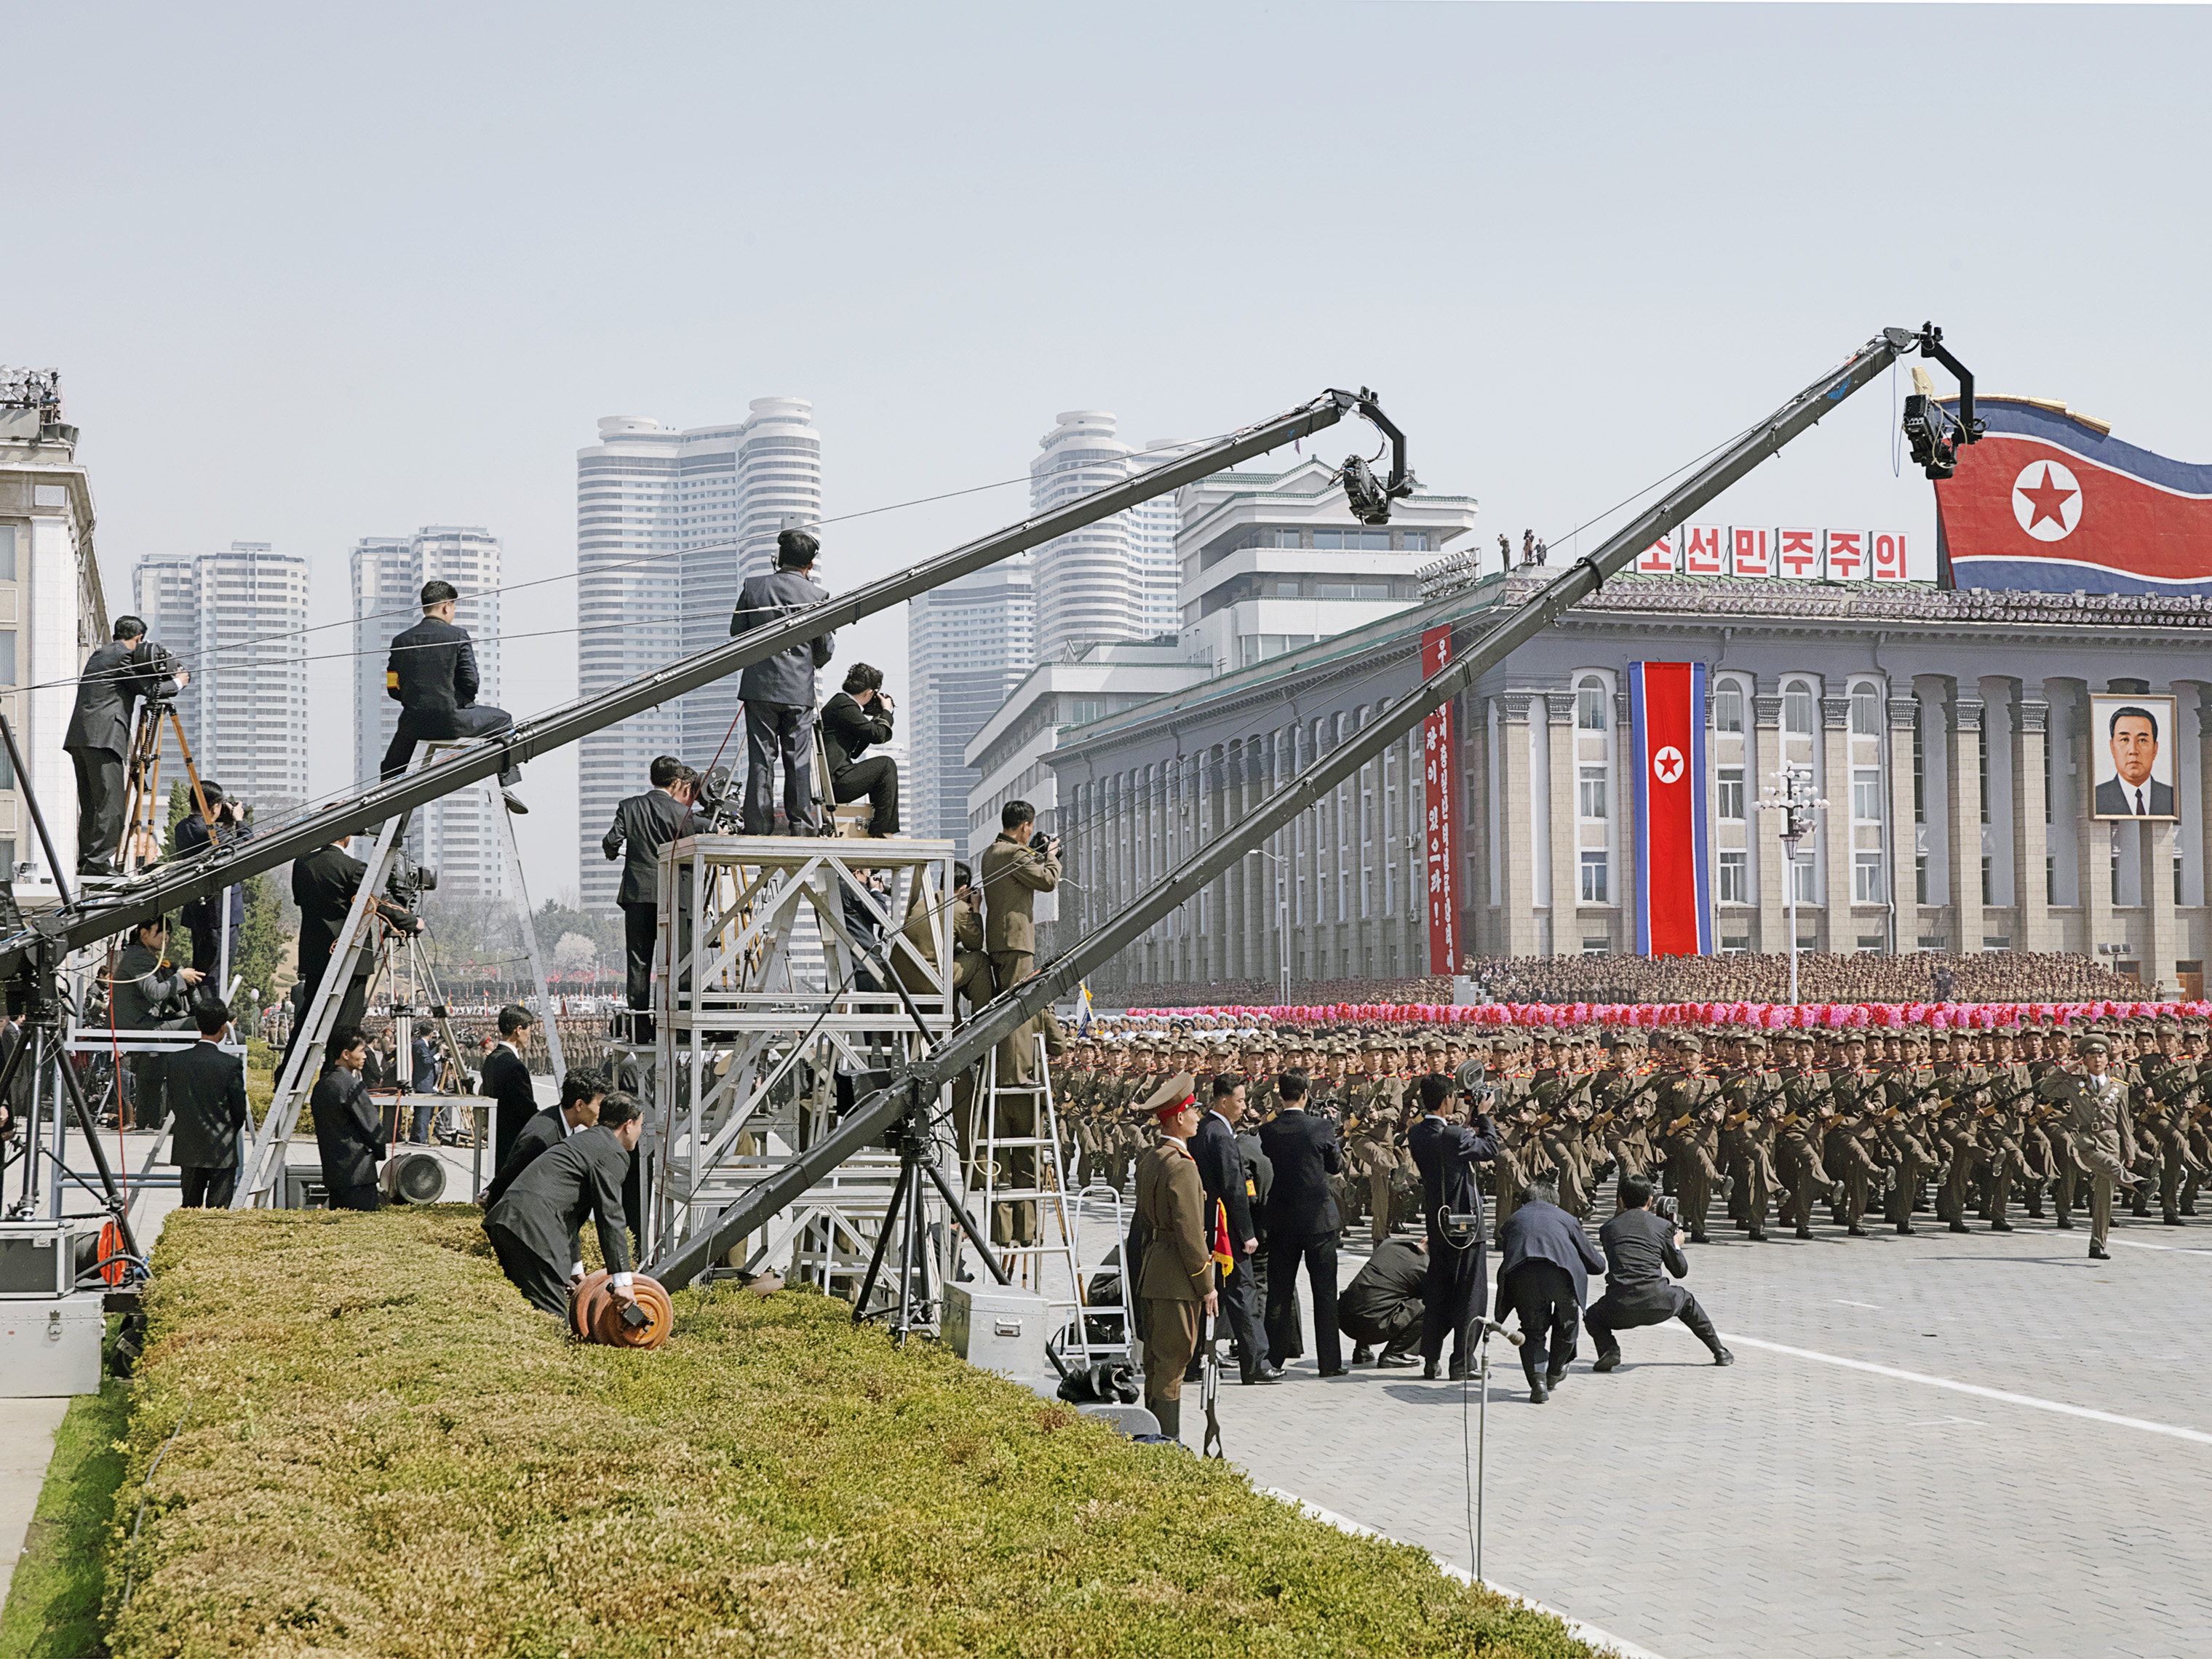 A view of Kim Il Sung Square during the parade celebrating the century since the birth of the "Great Leader" in April 2012. (Philippe Chancel)